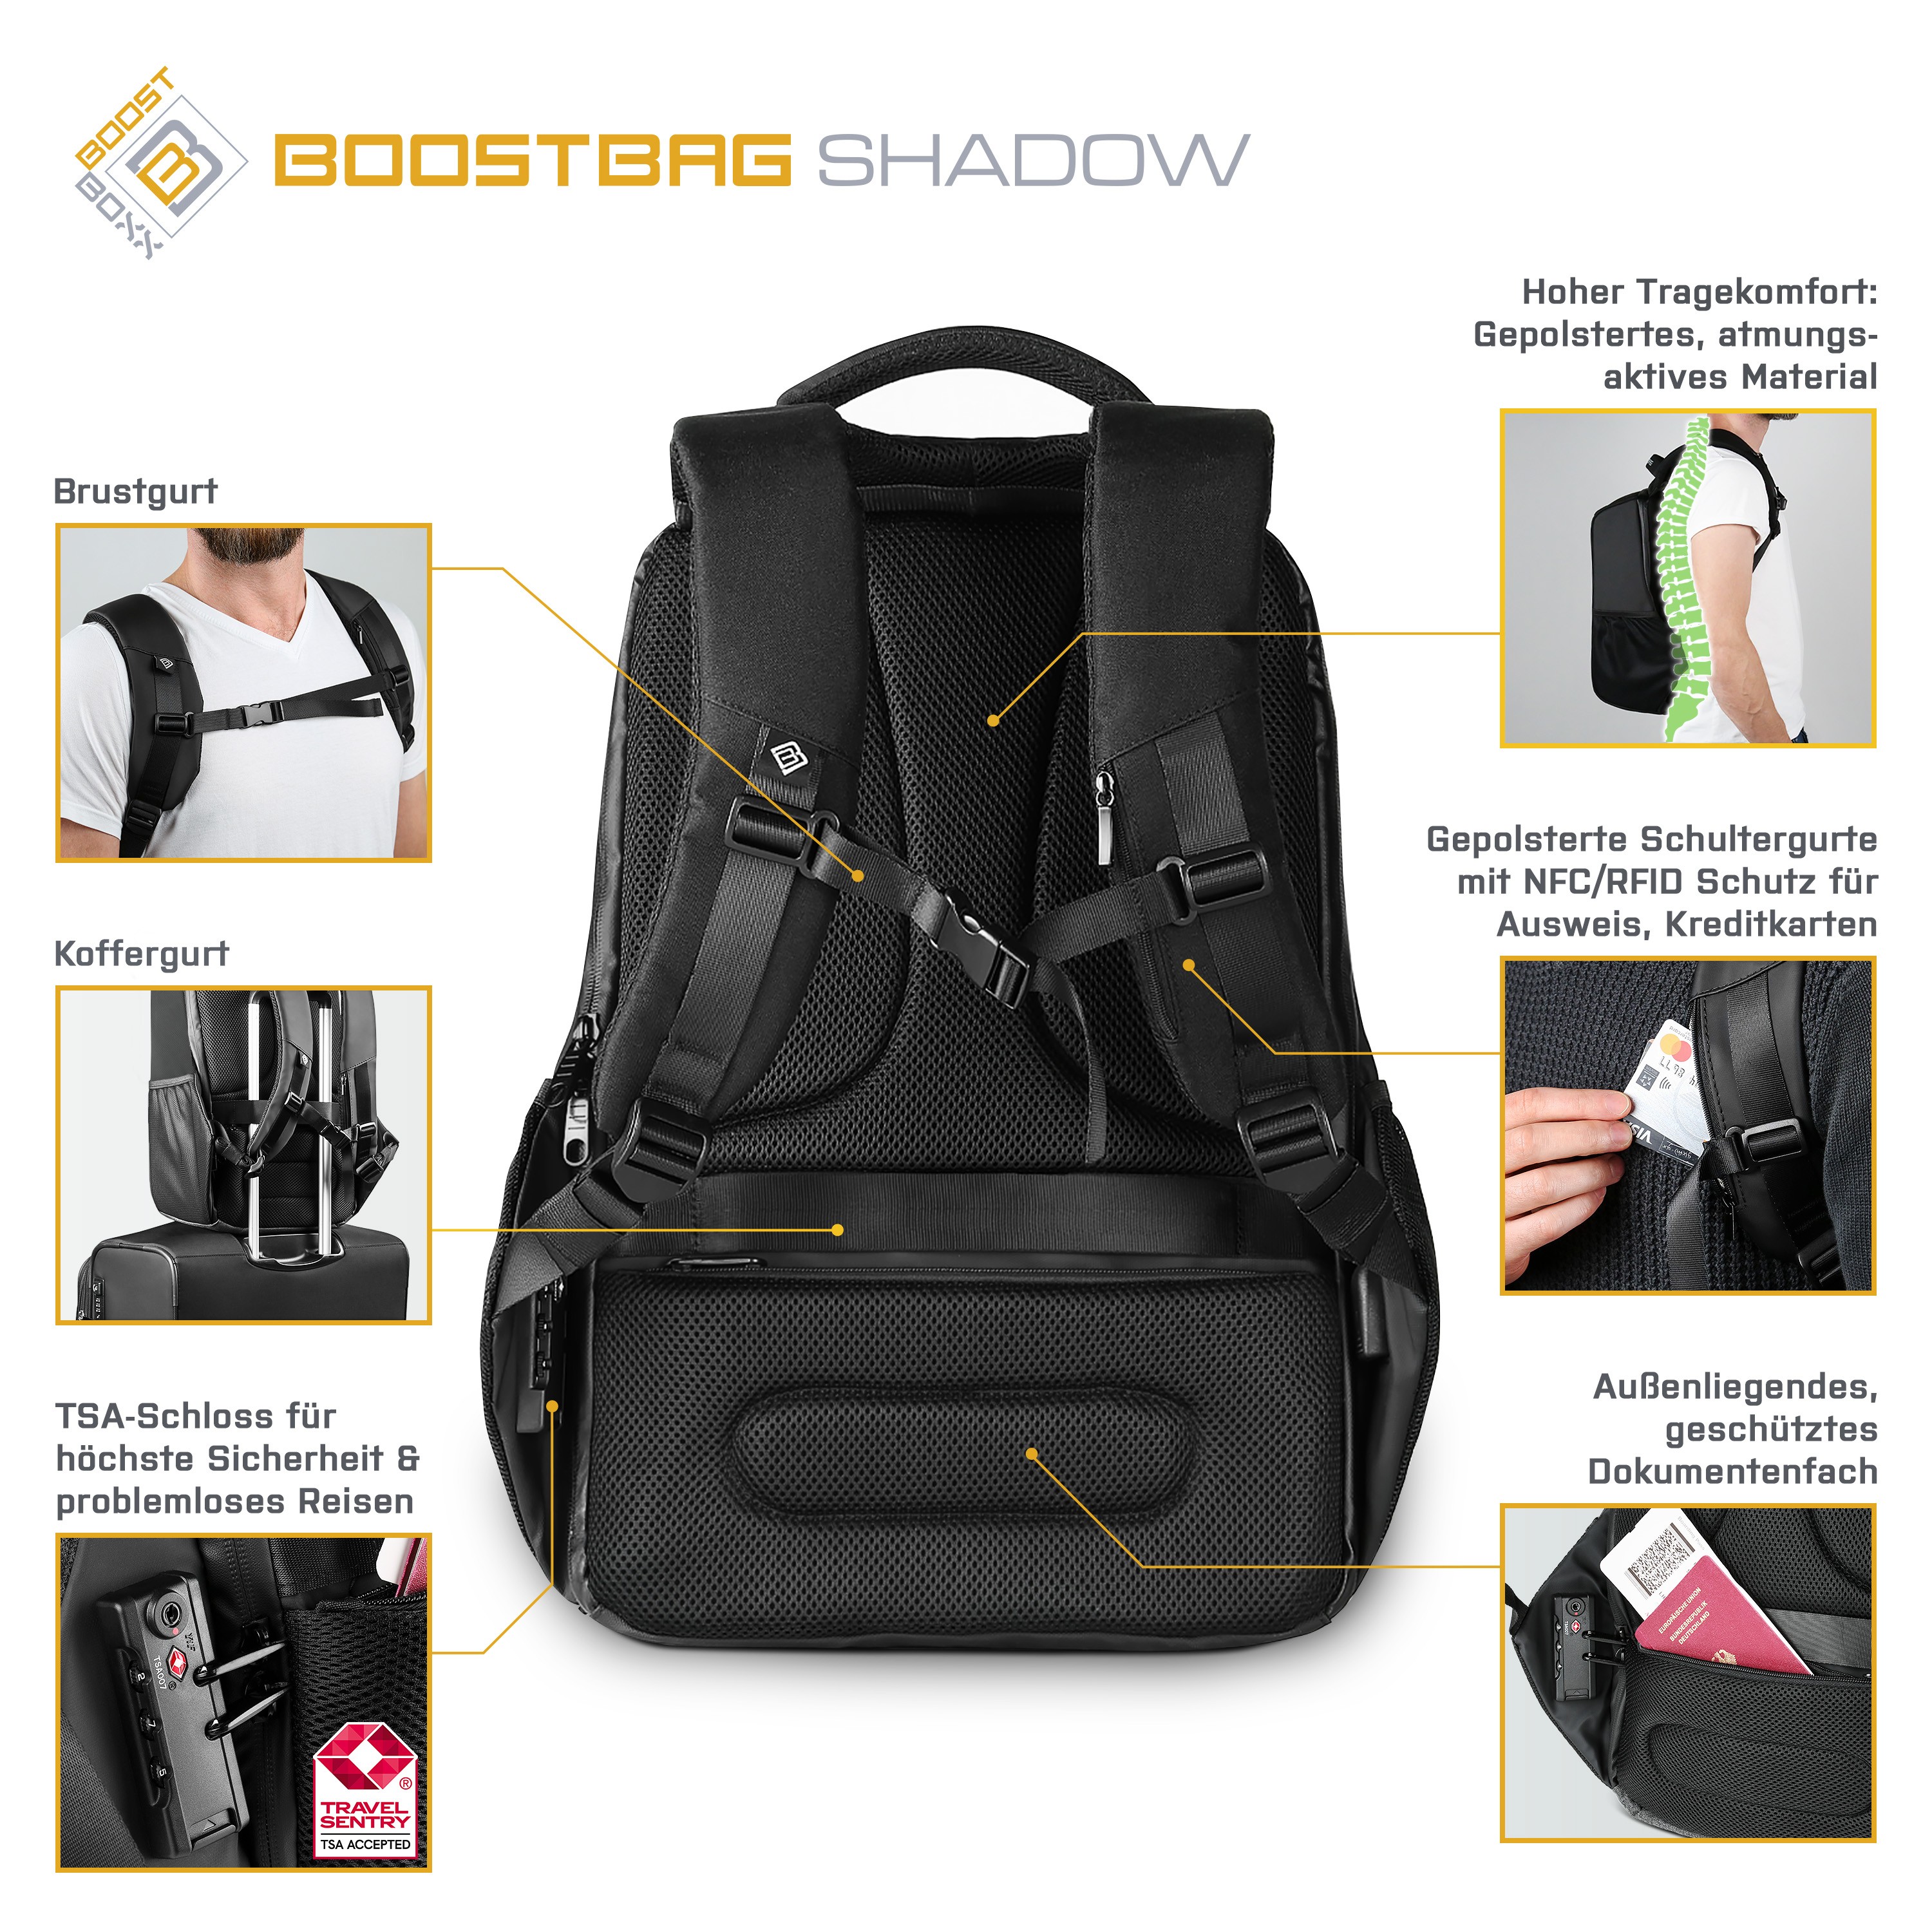 CSL Computer | BoostBoxx BoostBag Shadow - Notebook Backpack up to